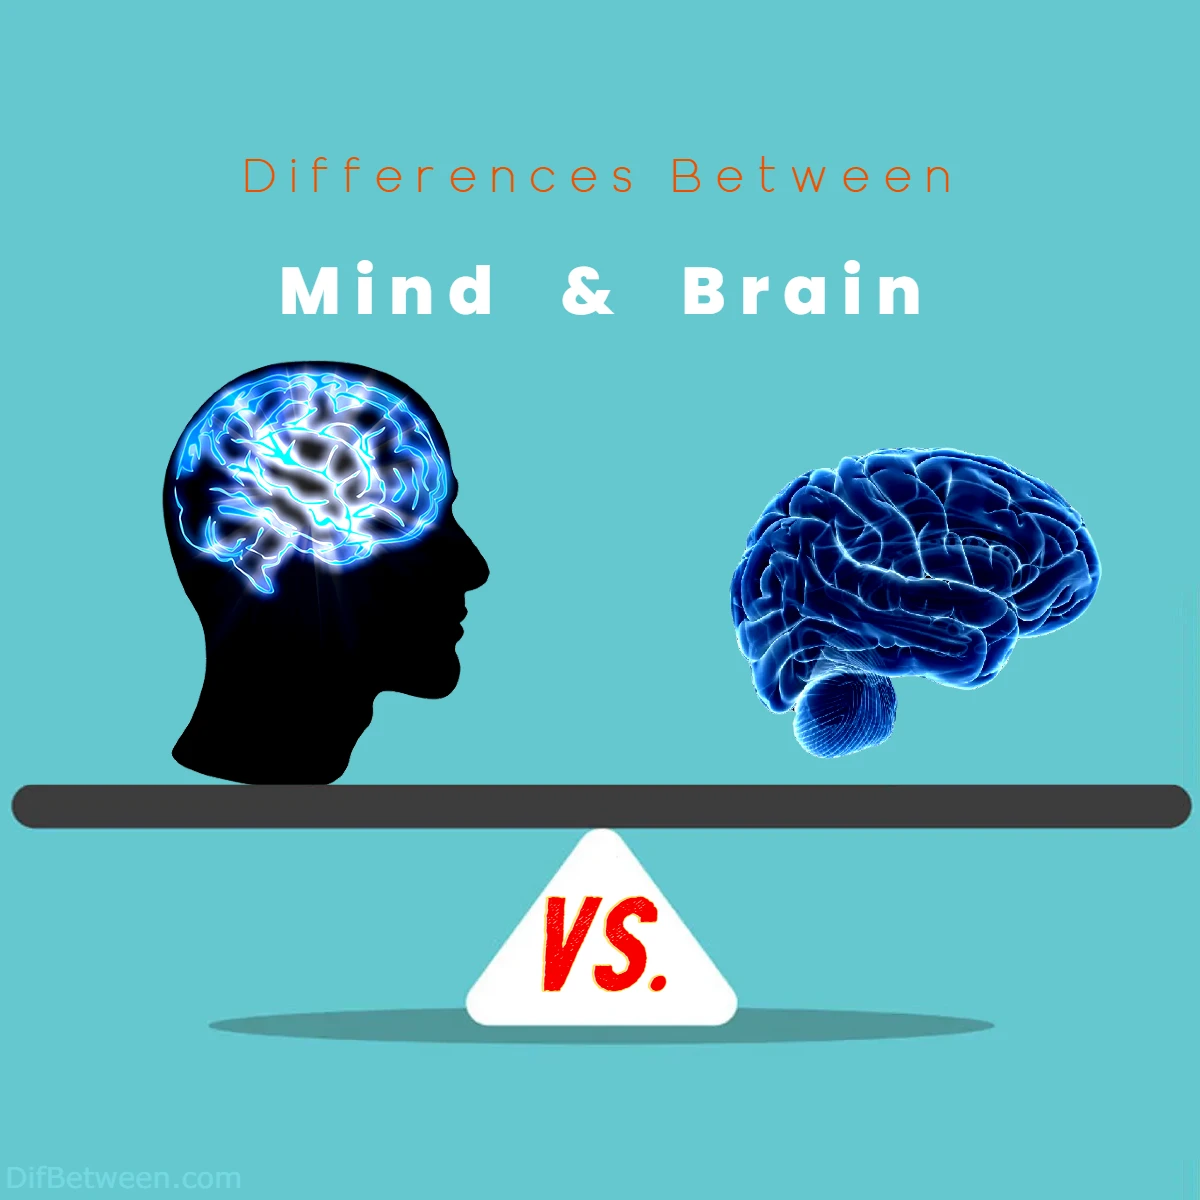 Differences Between Mind vs Brain